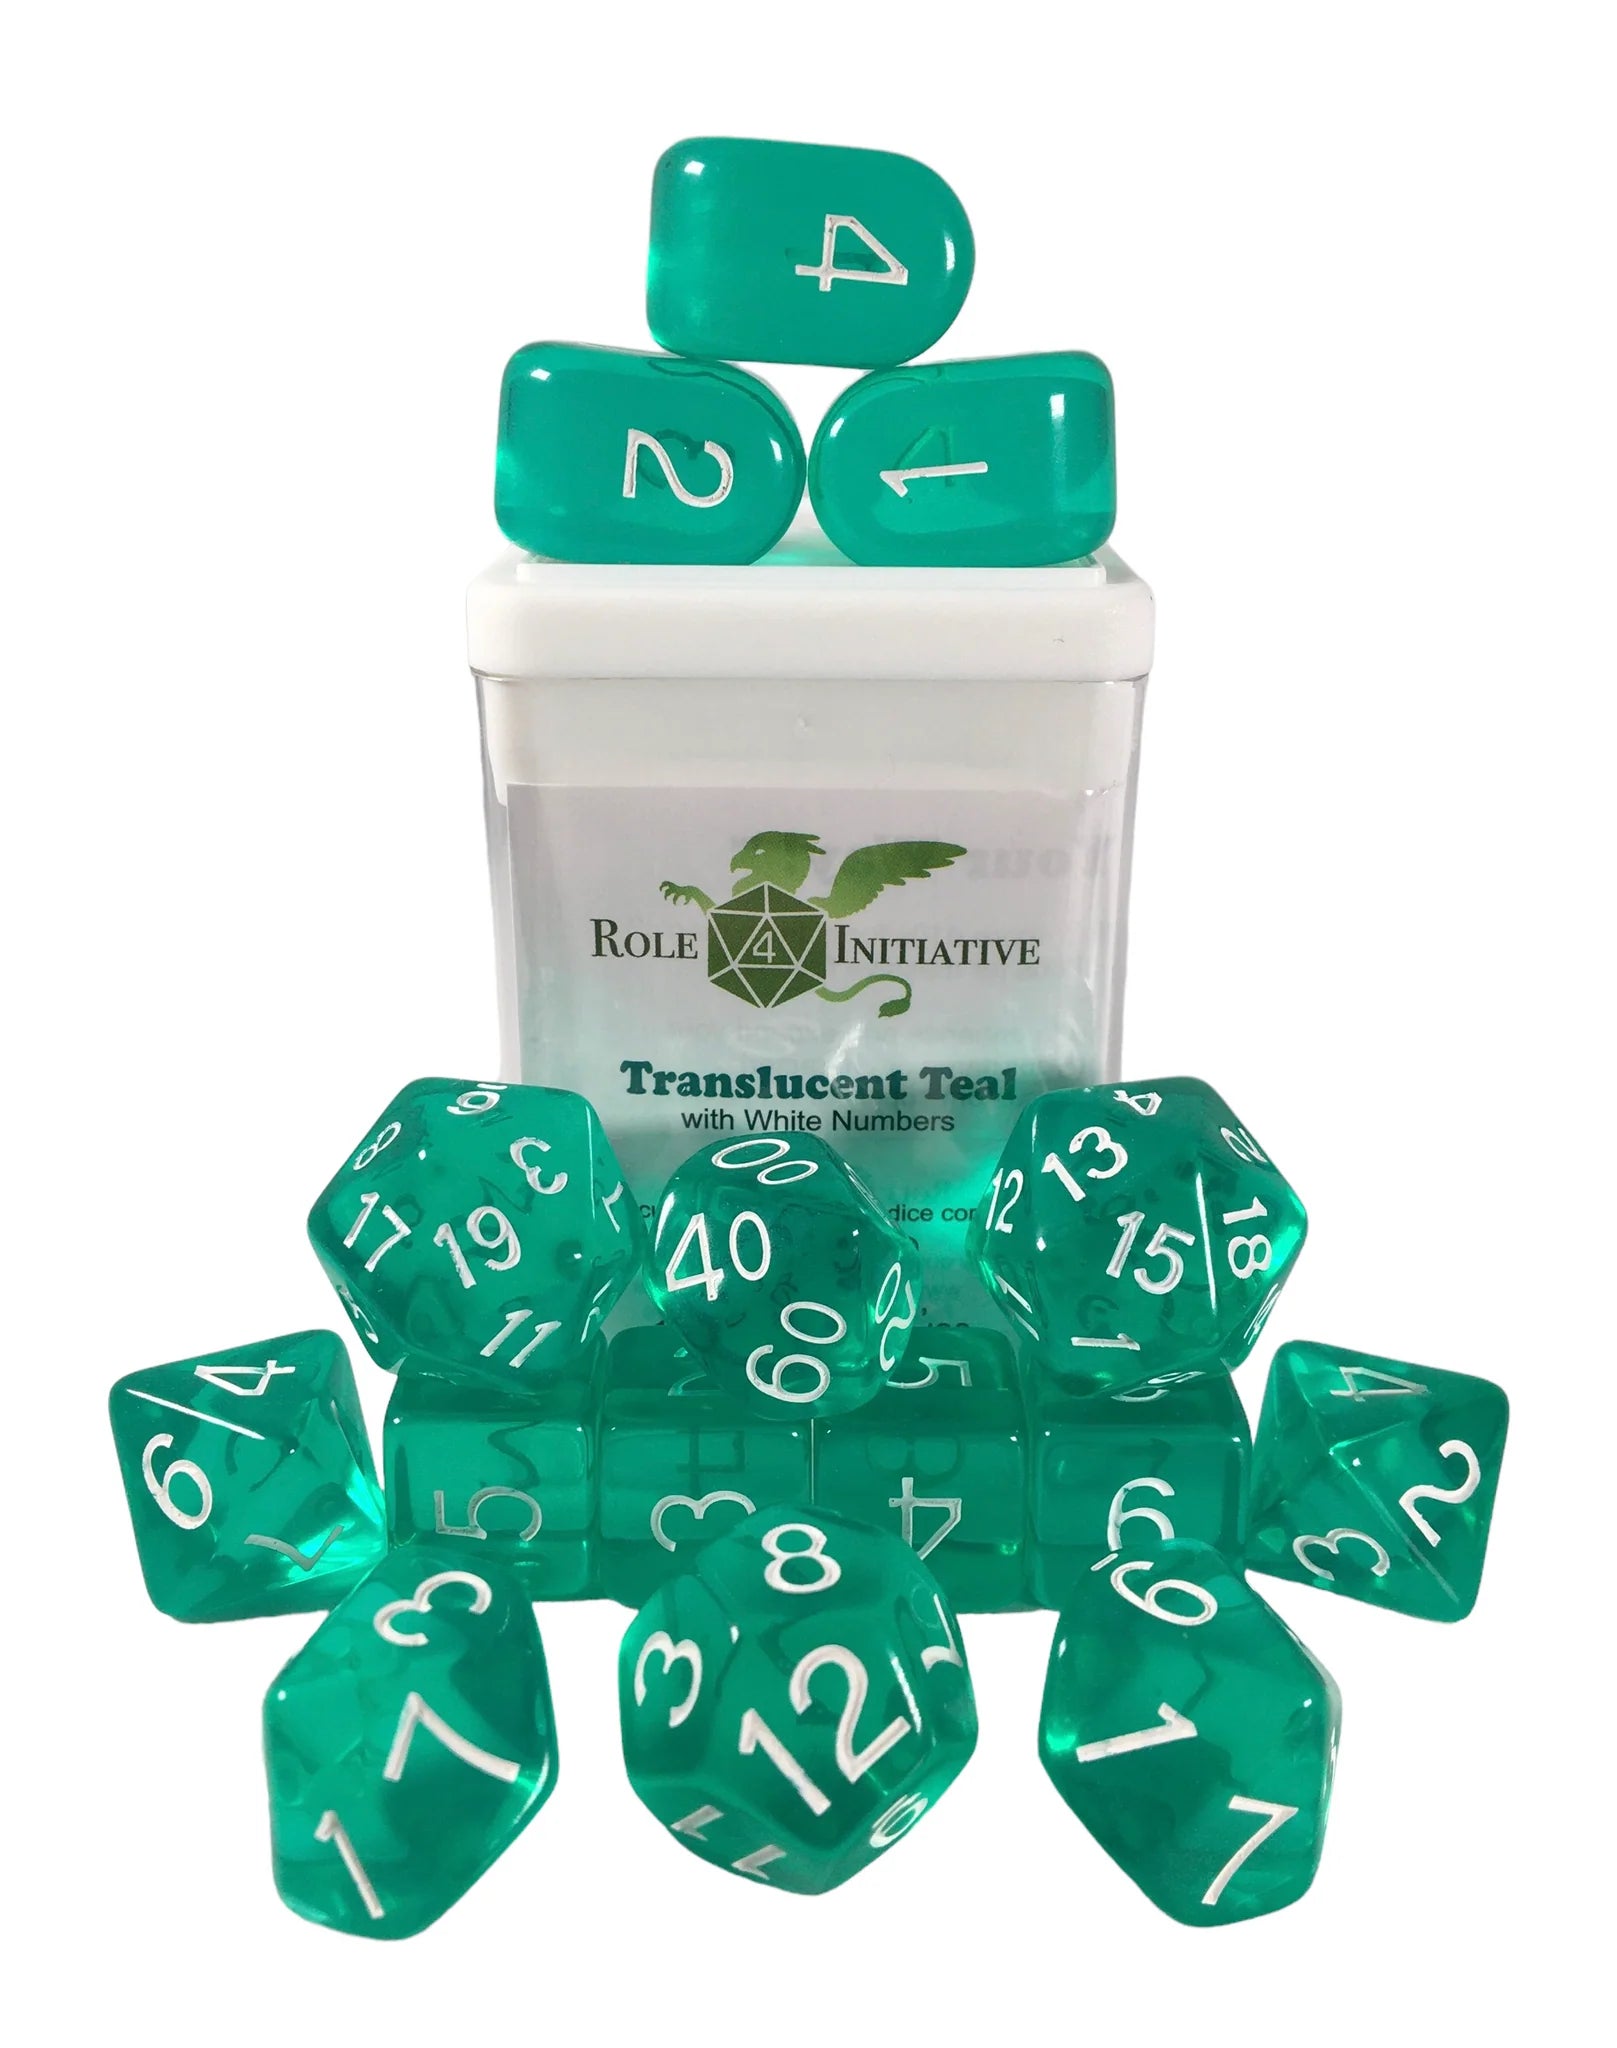 Role 4 Initiative Translucent Teal Set of 15 w/ Arch'd4 & all numbers